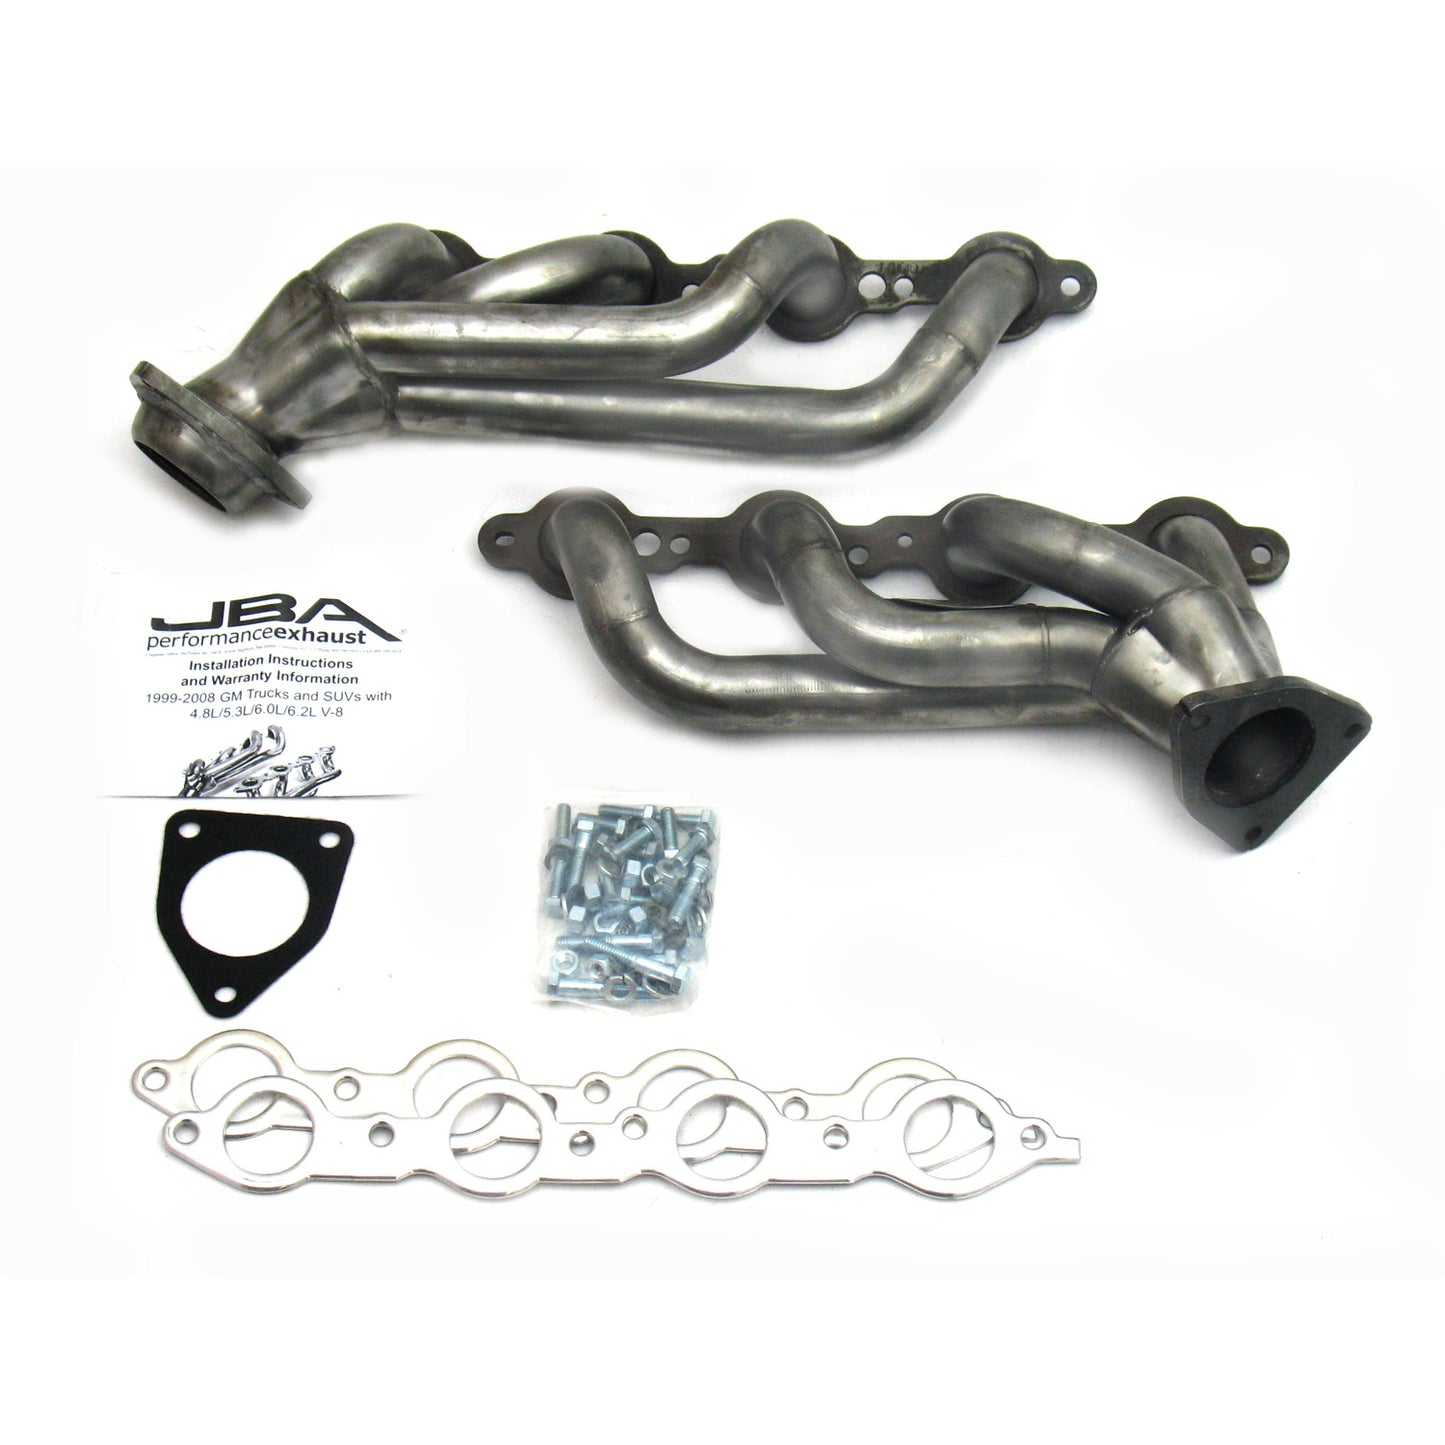 JBA Performance Exhaust 1850S-2 1 5/8" Header Shorty Stainless Steel 02-2013 GM Truck/SUV 4.8/5.3L and 07-13 6.0/6.2L